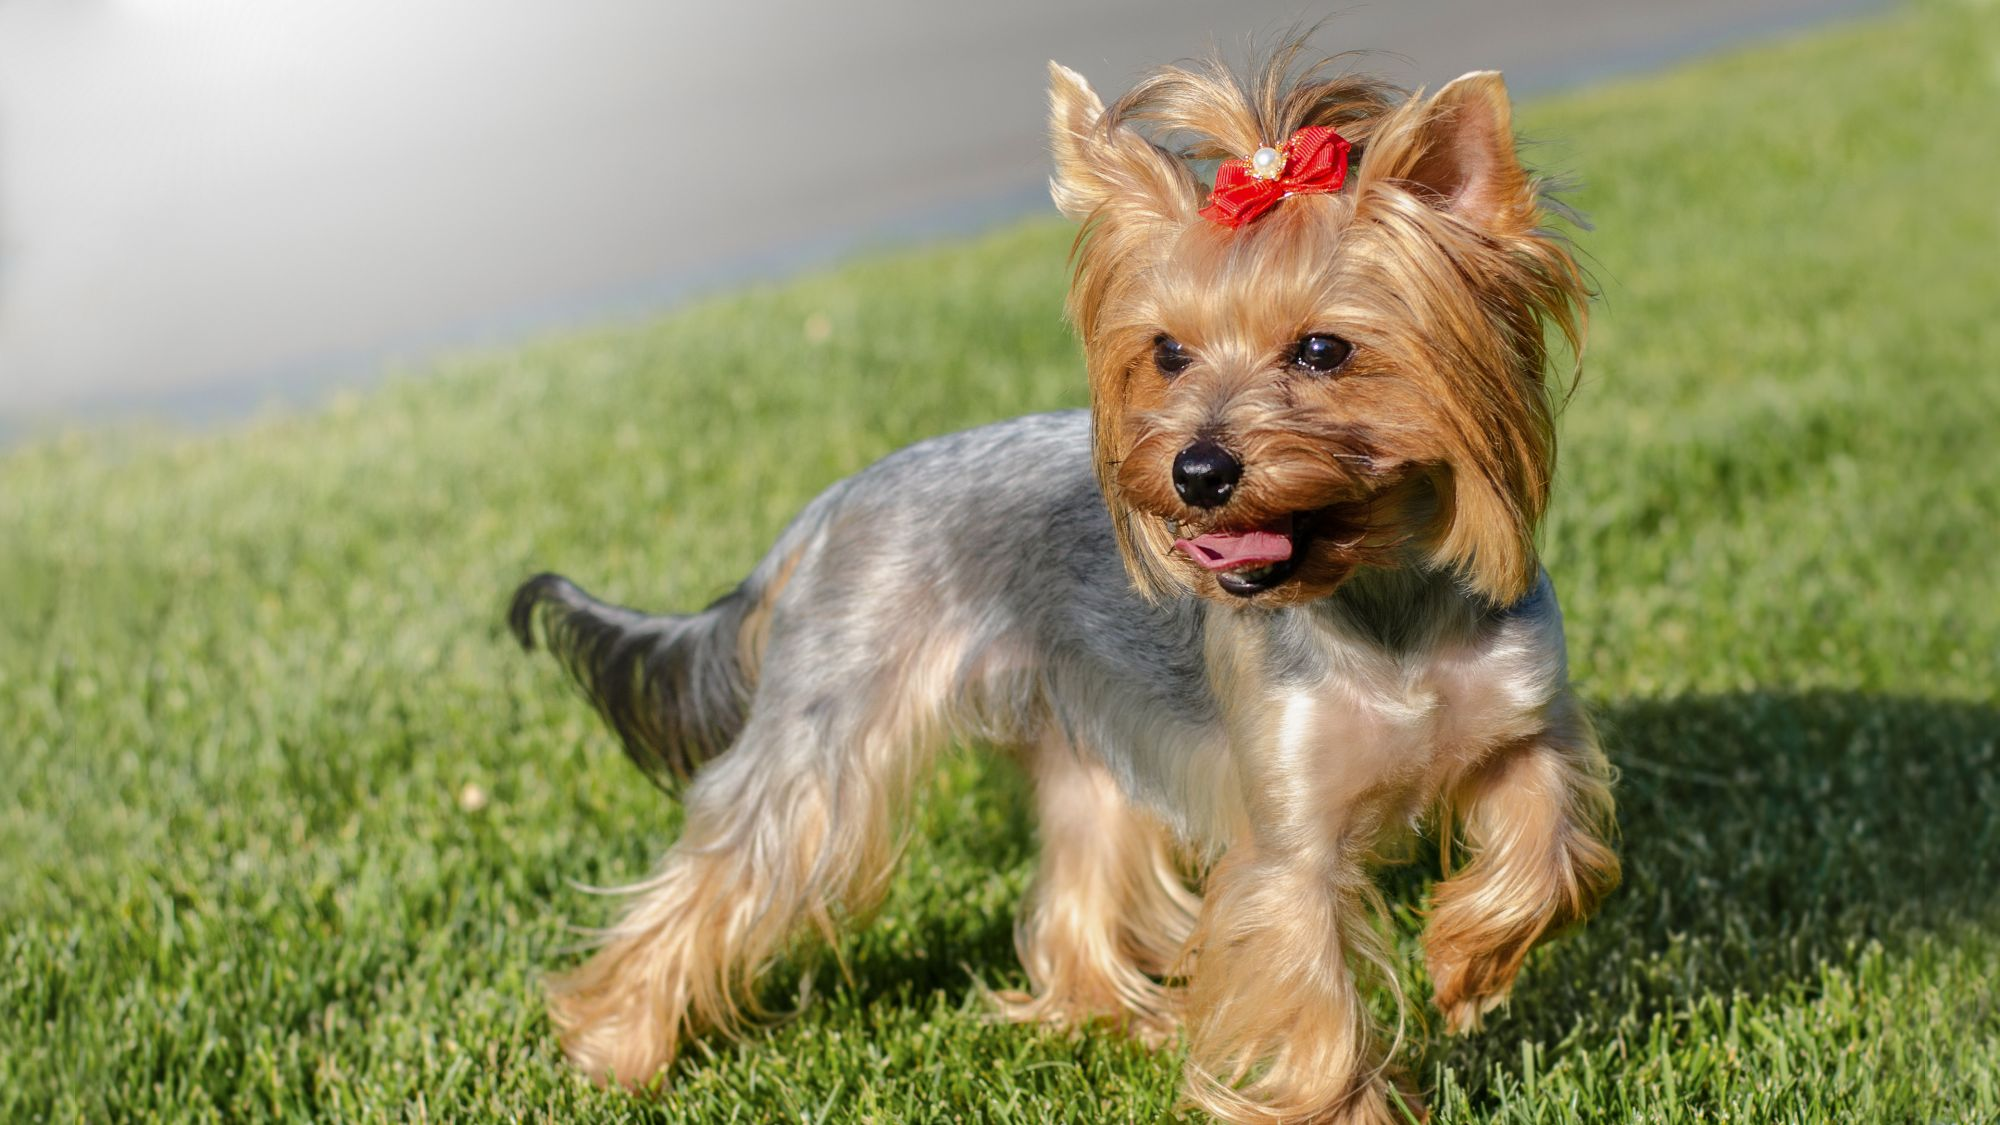 Yorkshire Terrier with a red bow in hair